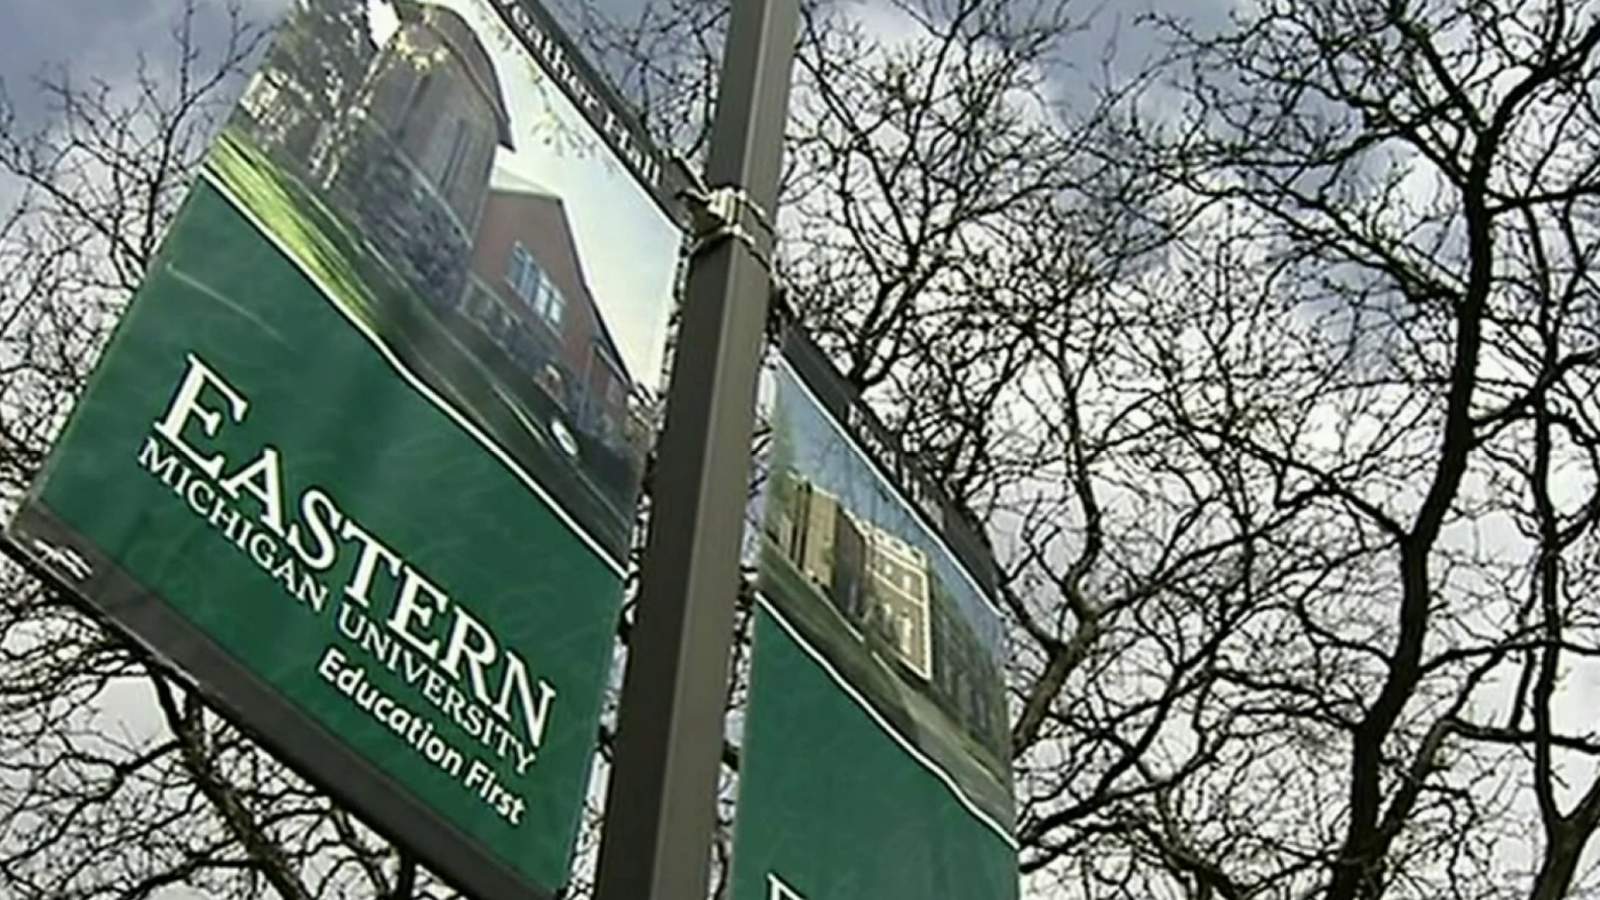 Eastern Michigan University closes campus on Tuesday due to winter weather